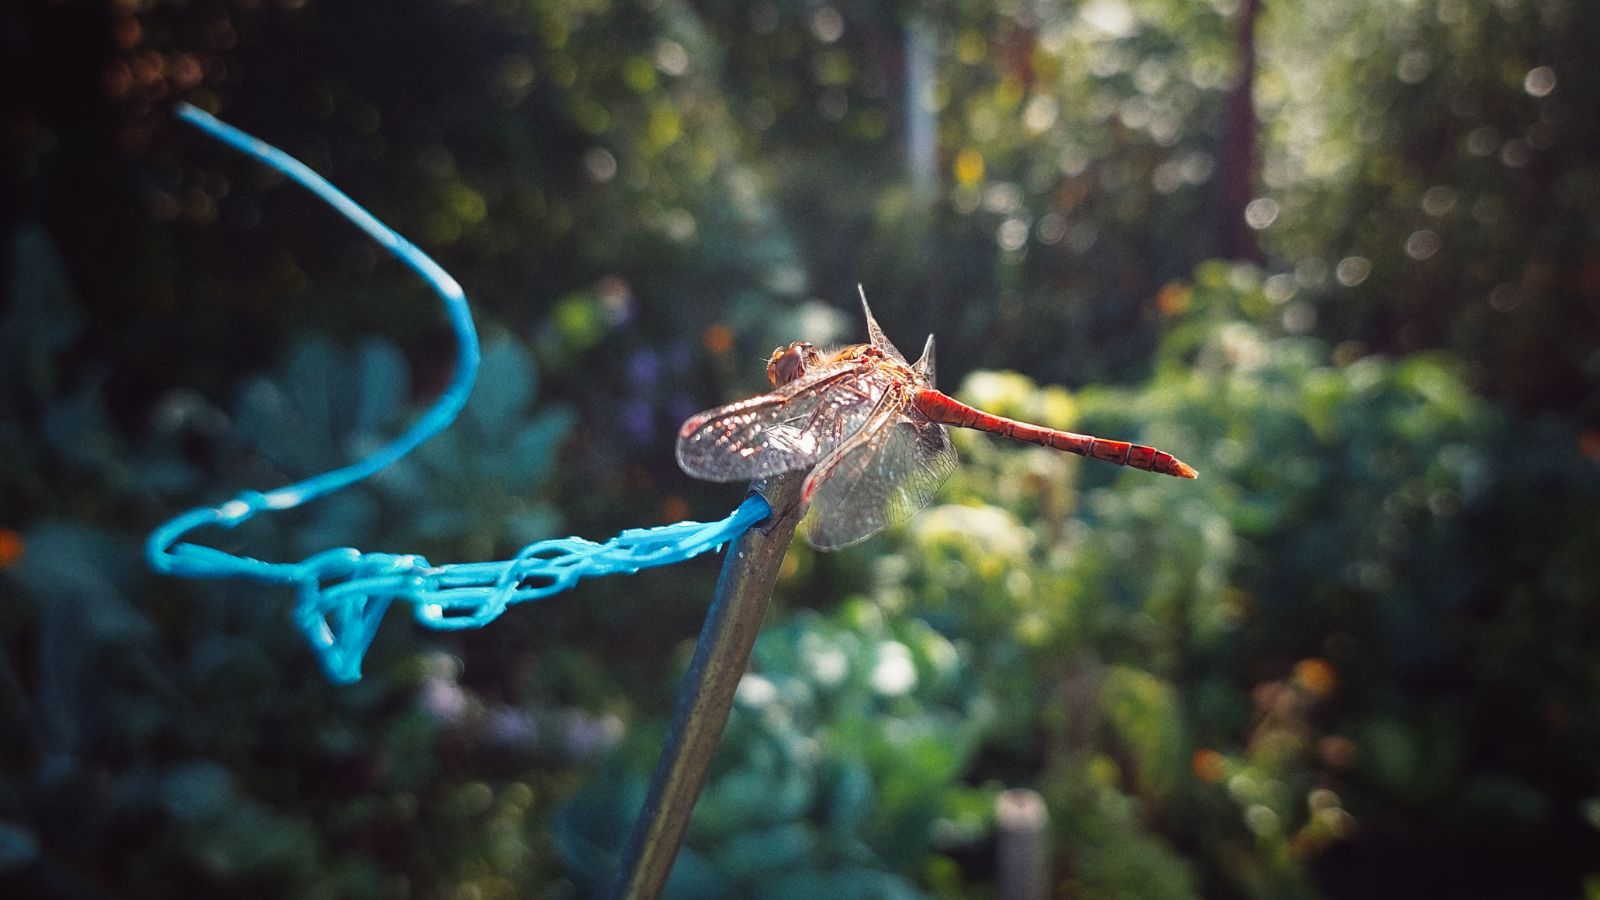 A dragonfly has landed on a plant support. There's a blue wire pointing in the opposite direction.